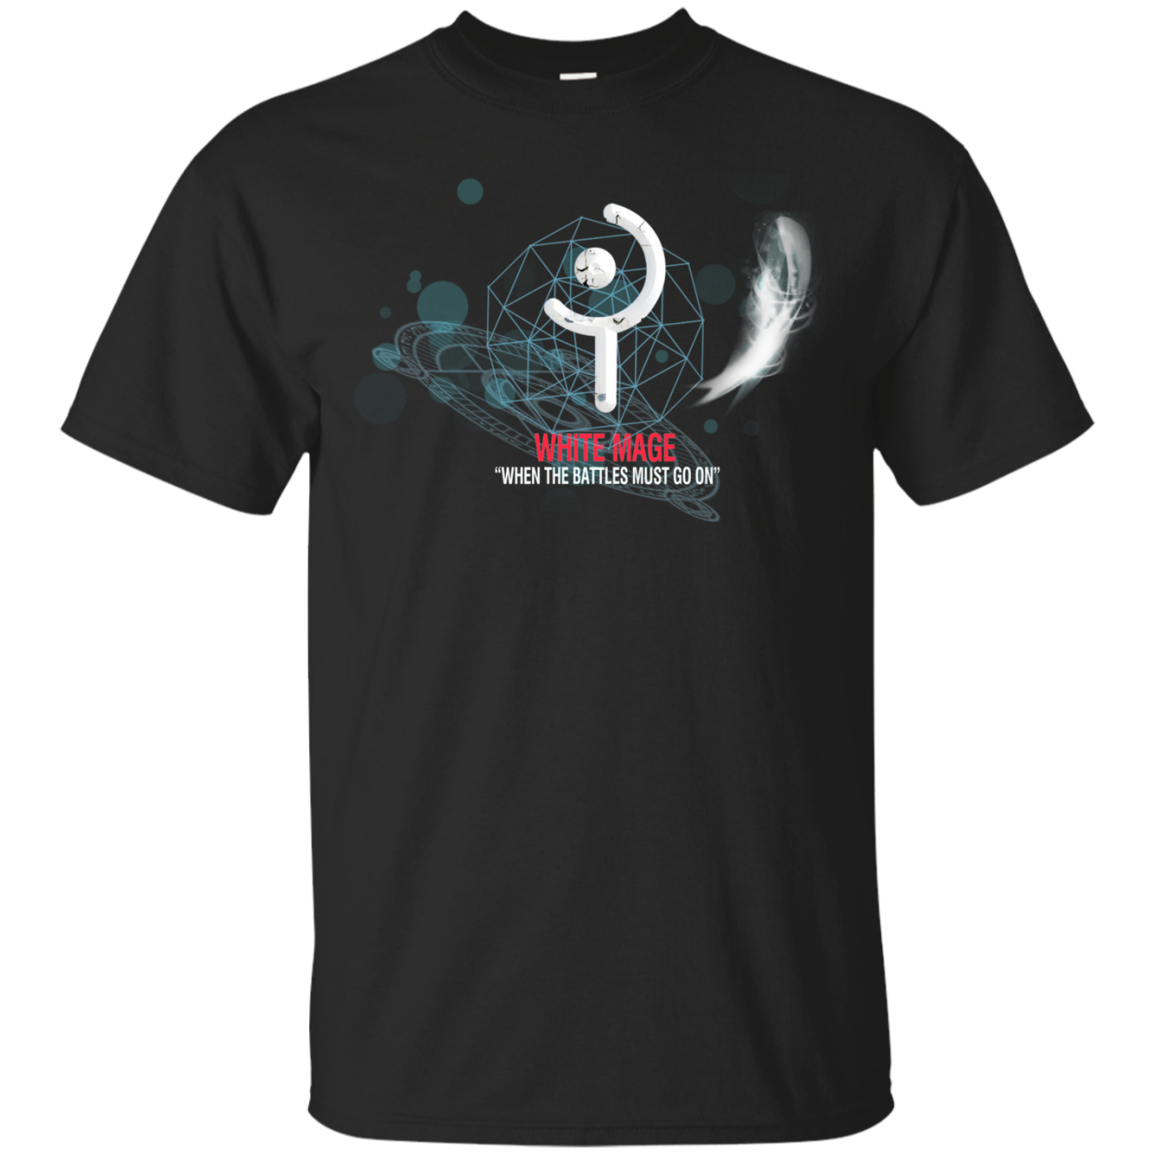 Final Fantasy XIV Shirts White Mage When The Battles Must Go On - Teesmiley